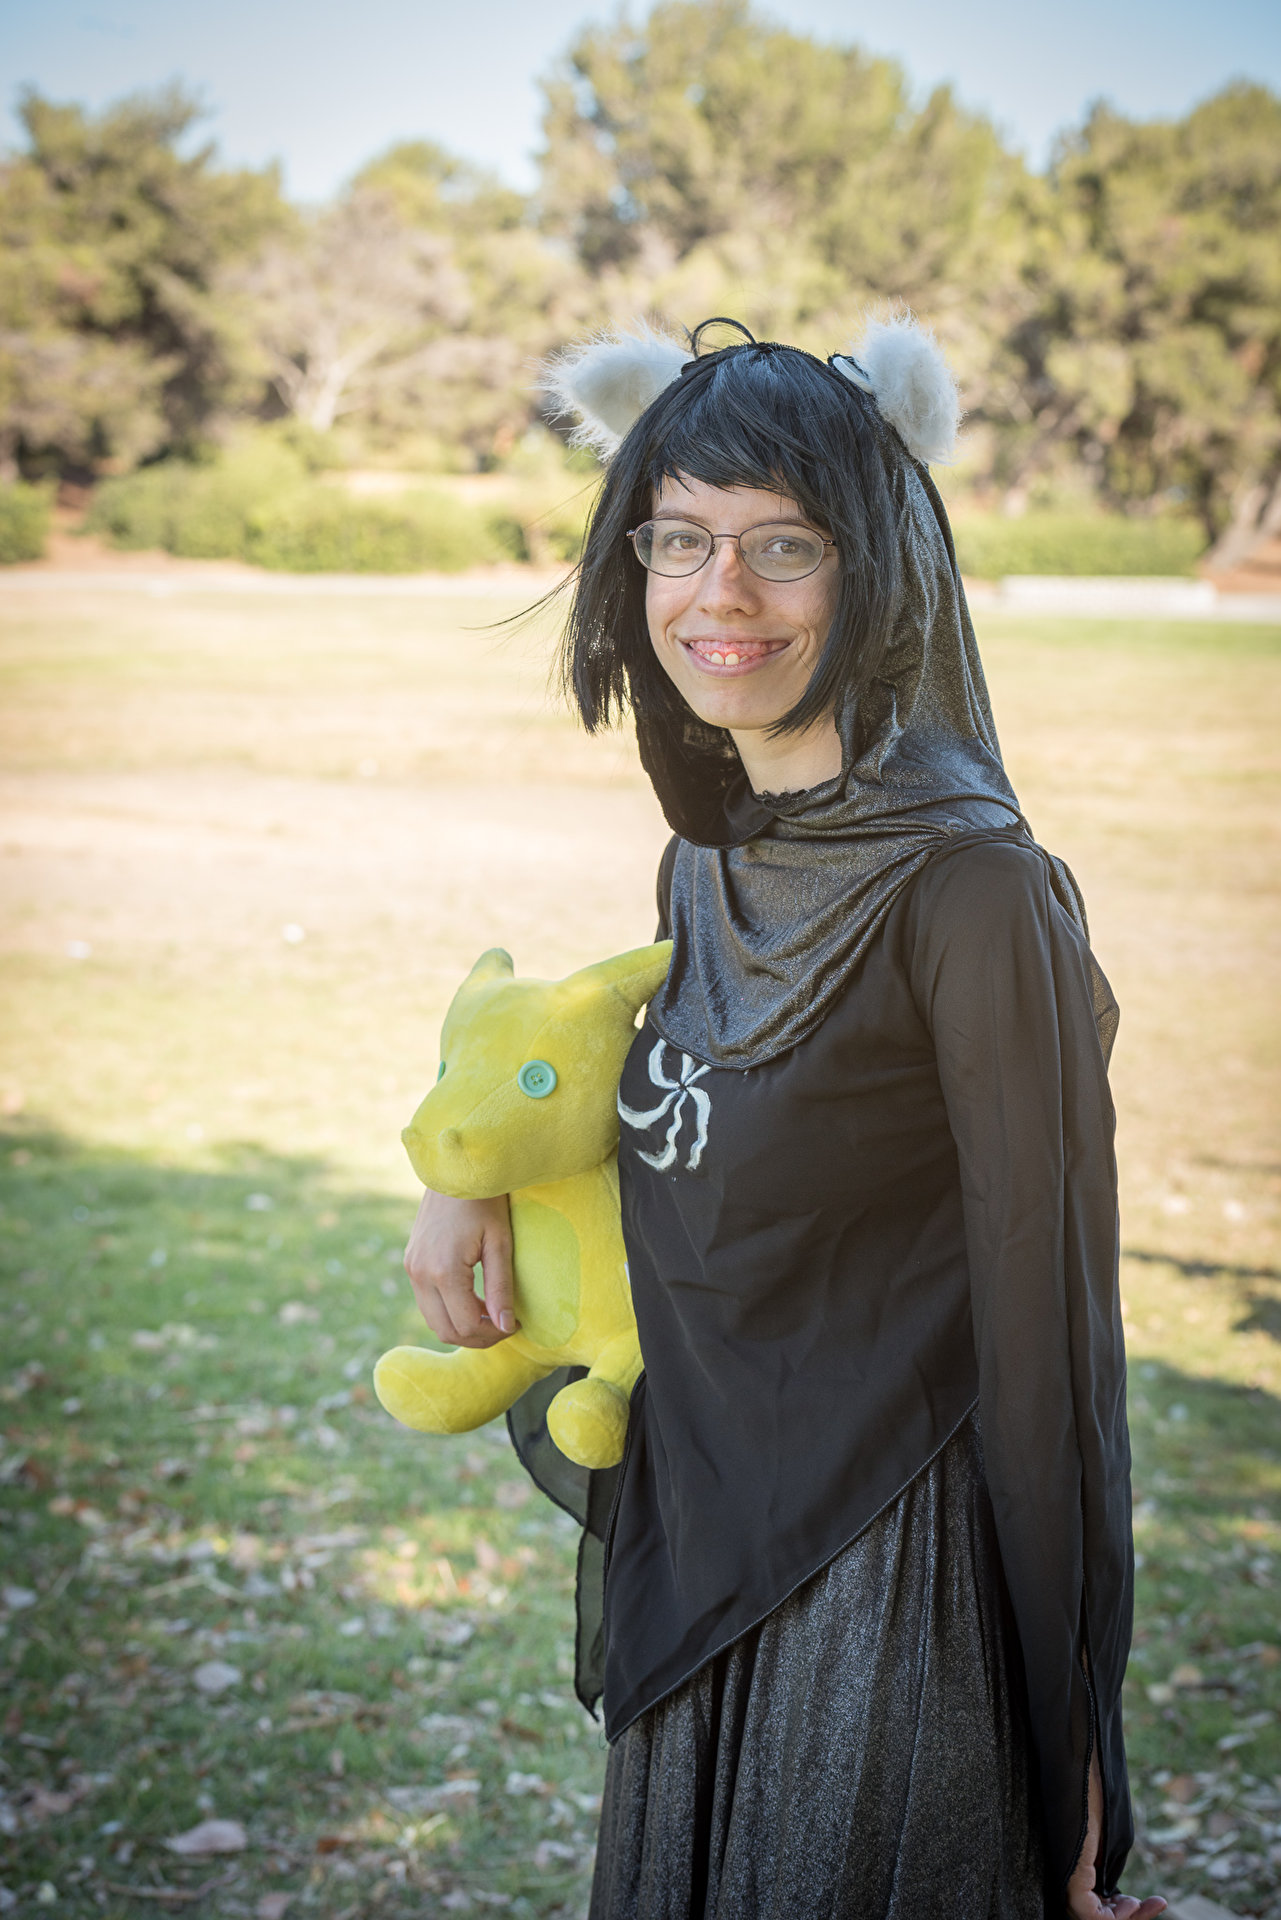 Cospix.net photo featuring Chad Cosplay